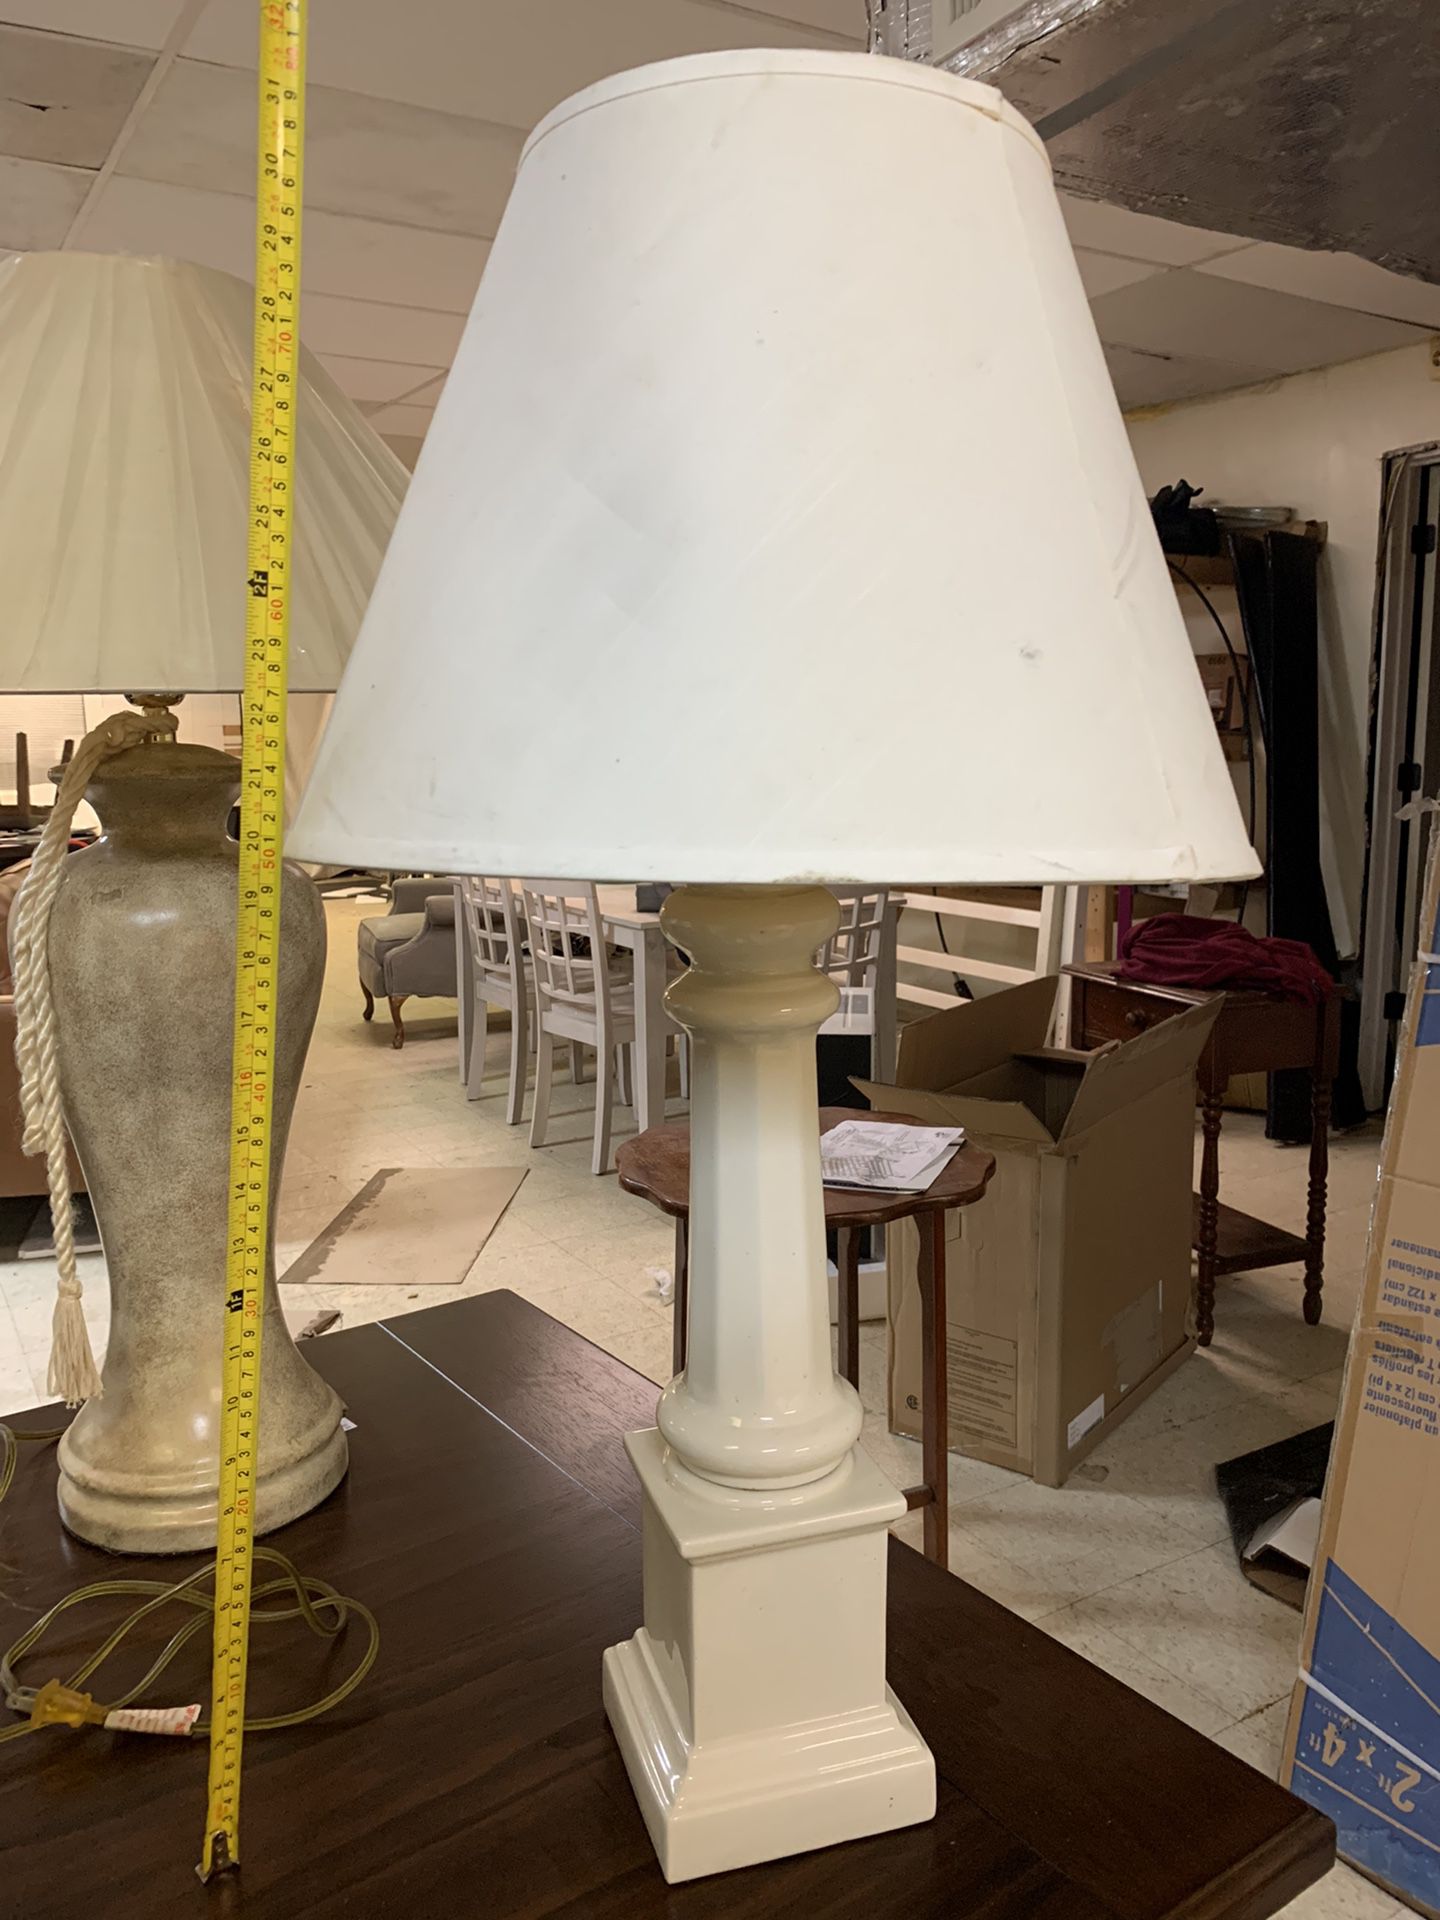 Used Single Lamp With Shade Approximately 31 Inches in Height